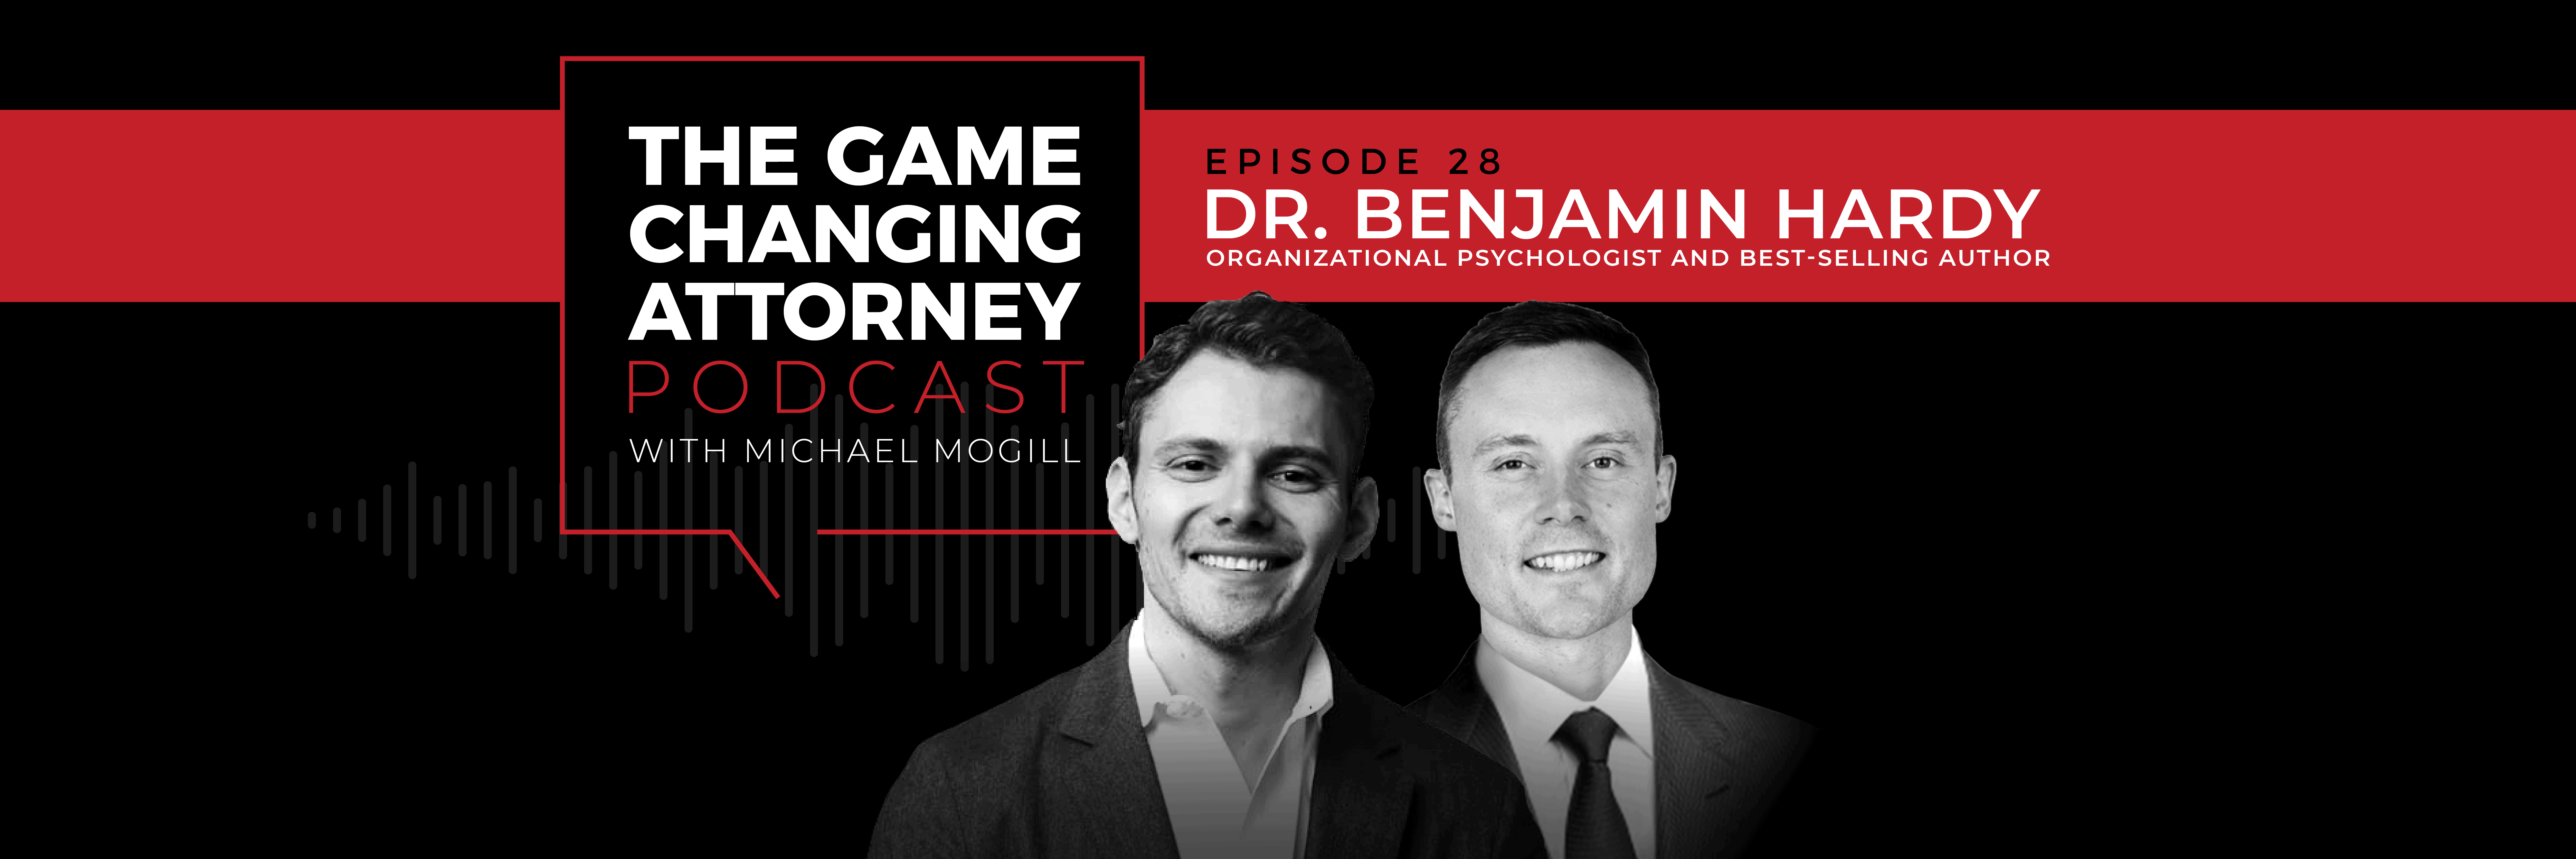 Ben Hardy - The Game Changing Attorney Podcast - Desktop